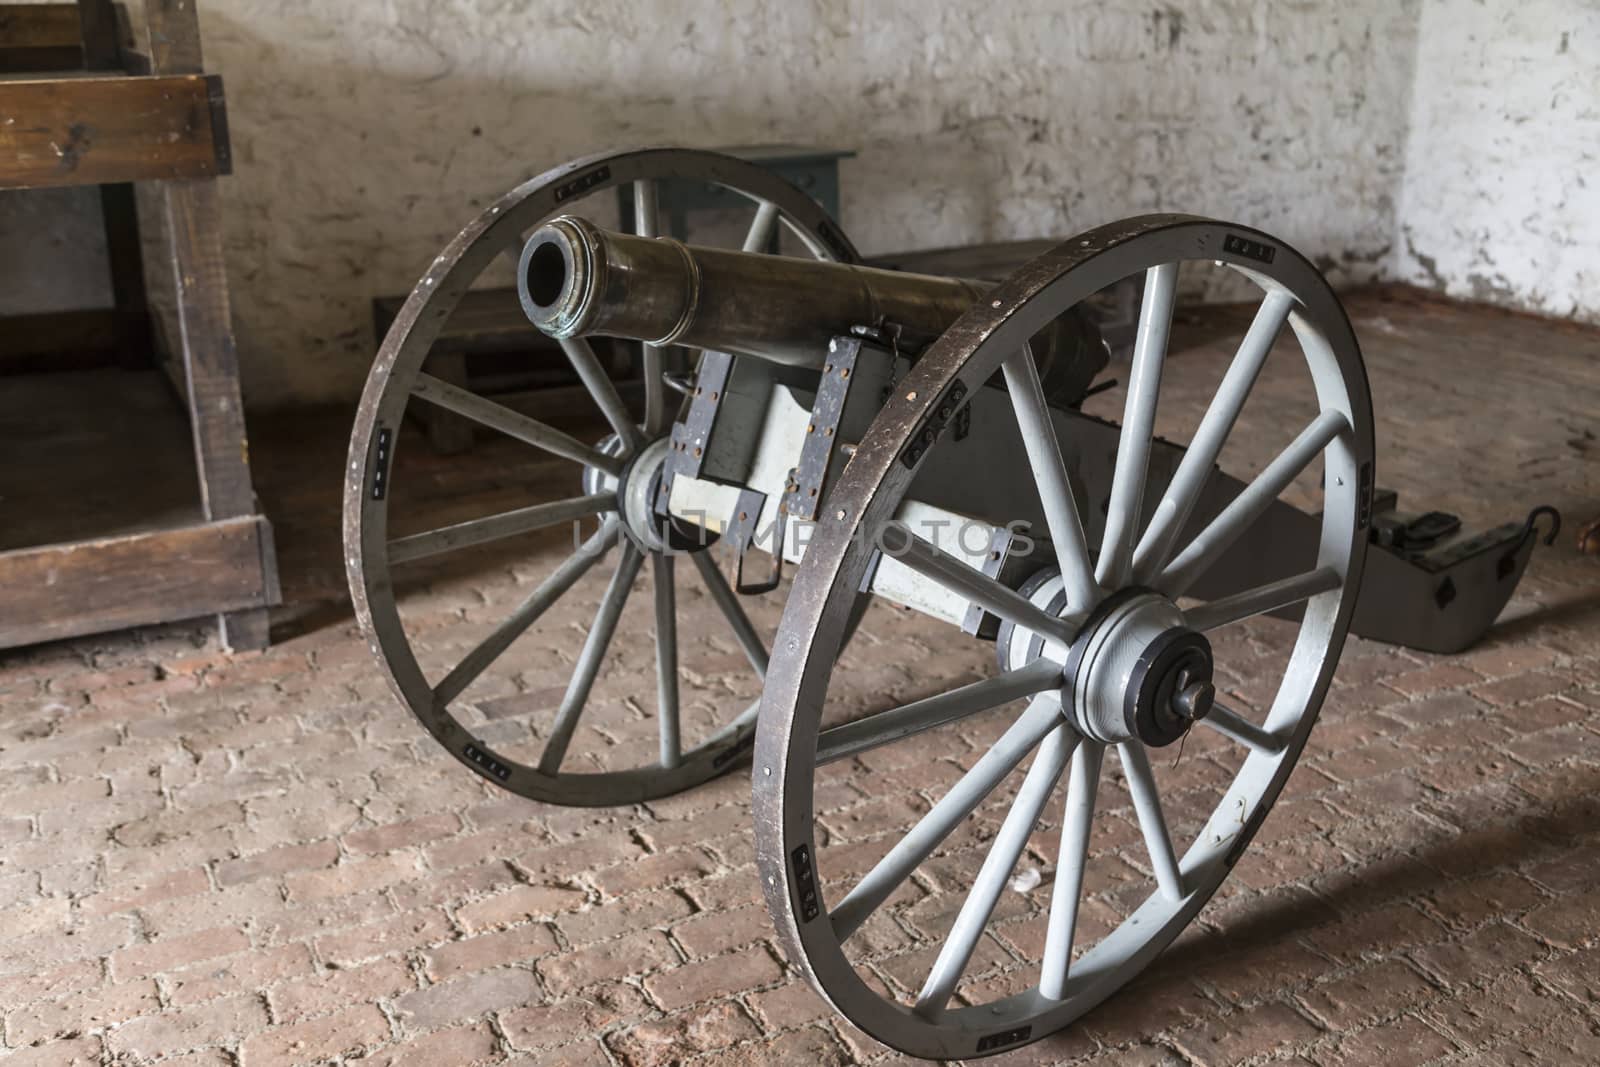 Antique civil war cannon with giant wheels displayed in an old room.